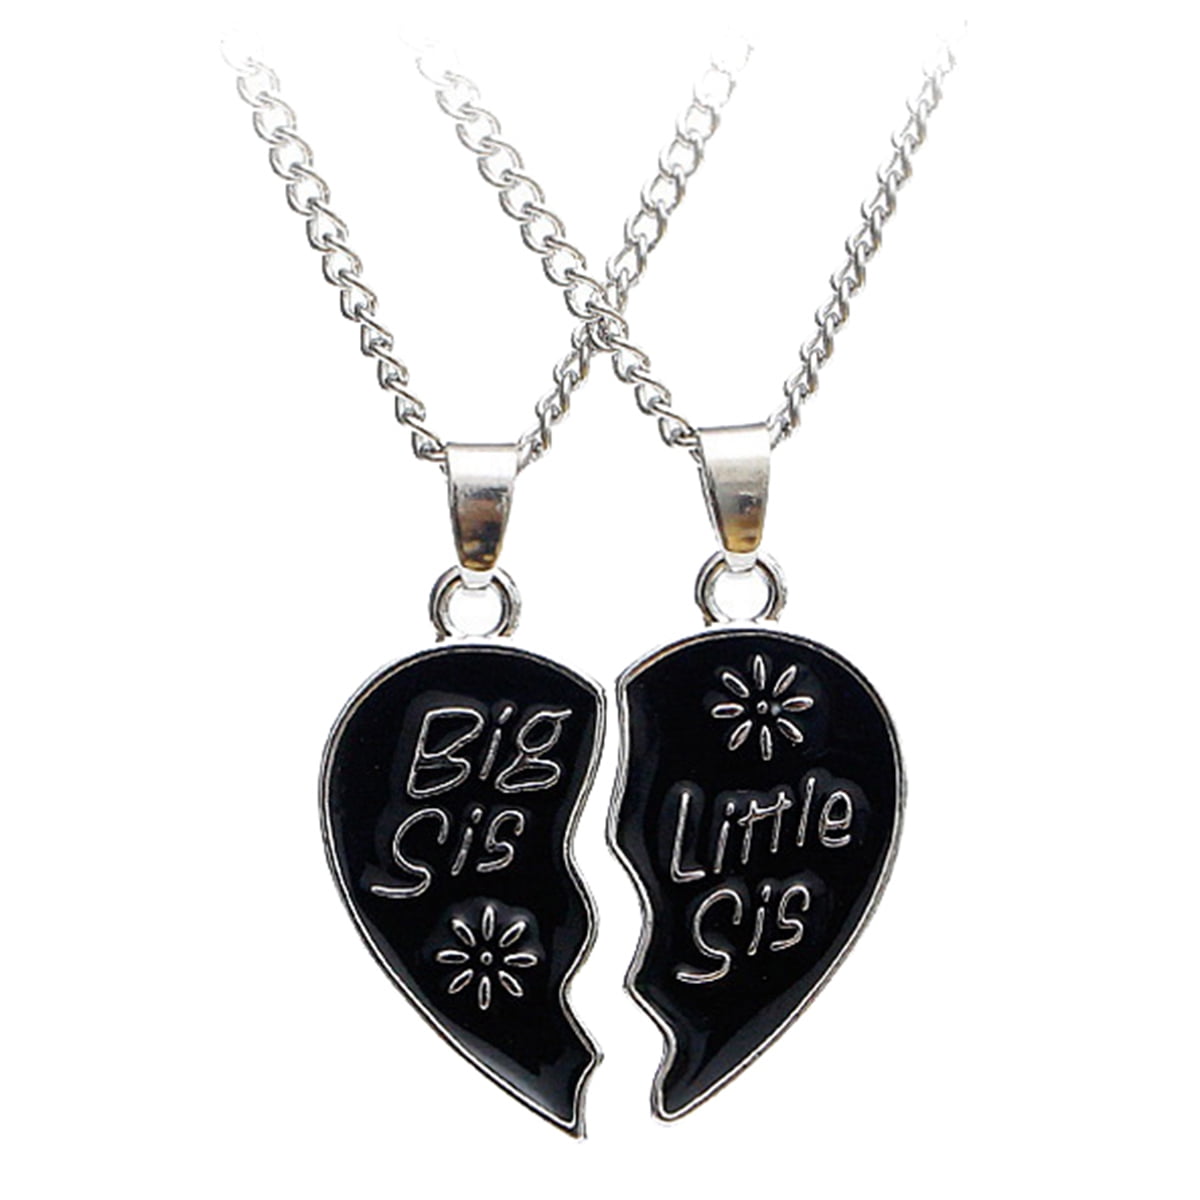 Big Sister Necklace - Love Story